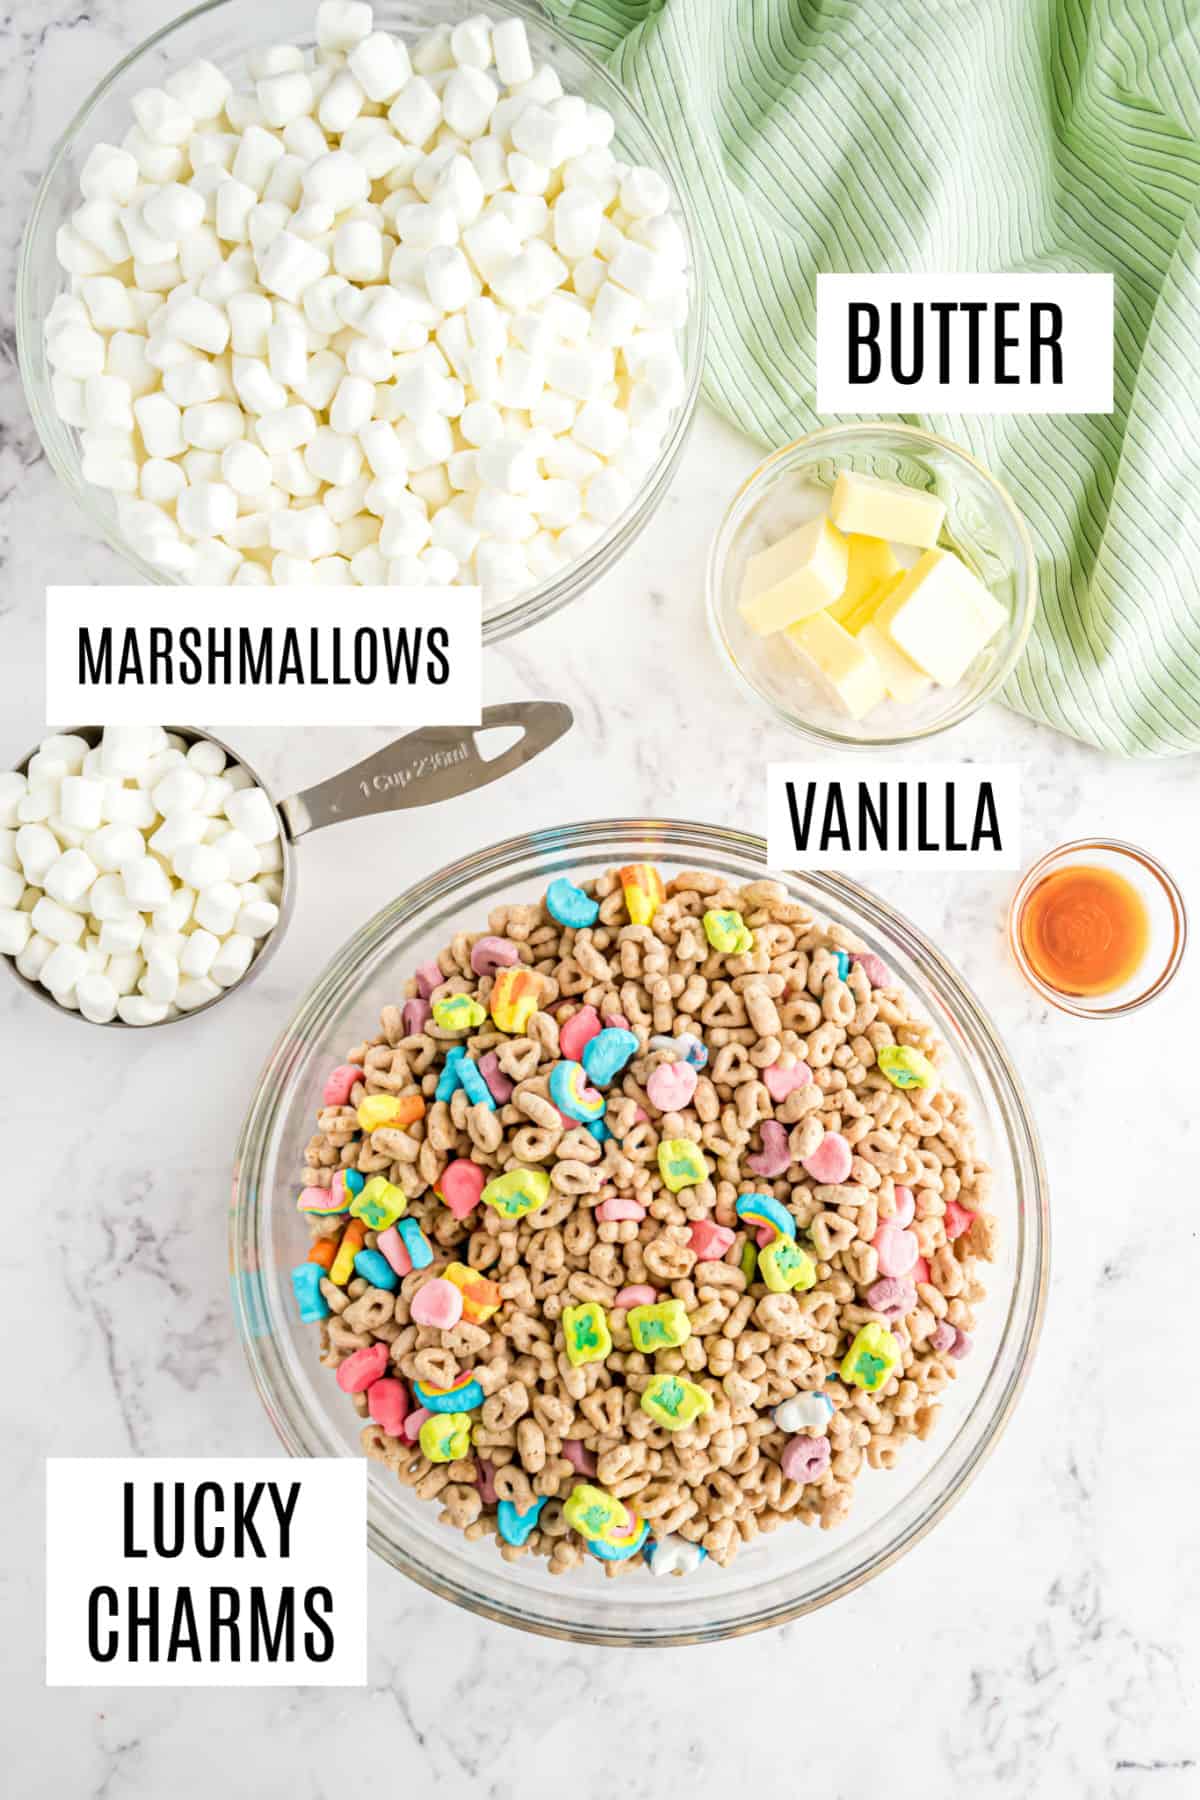 Exploring the Ingredients of Lucky Charms